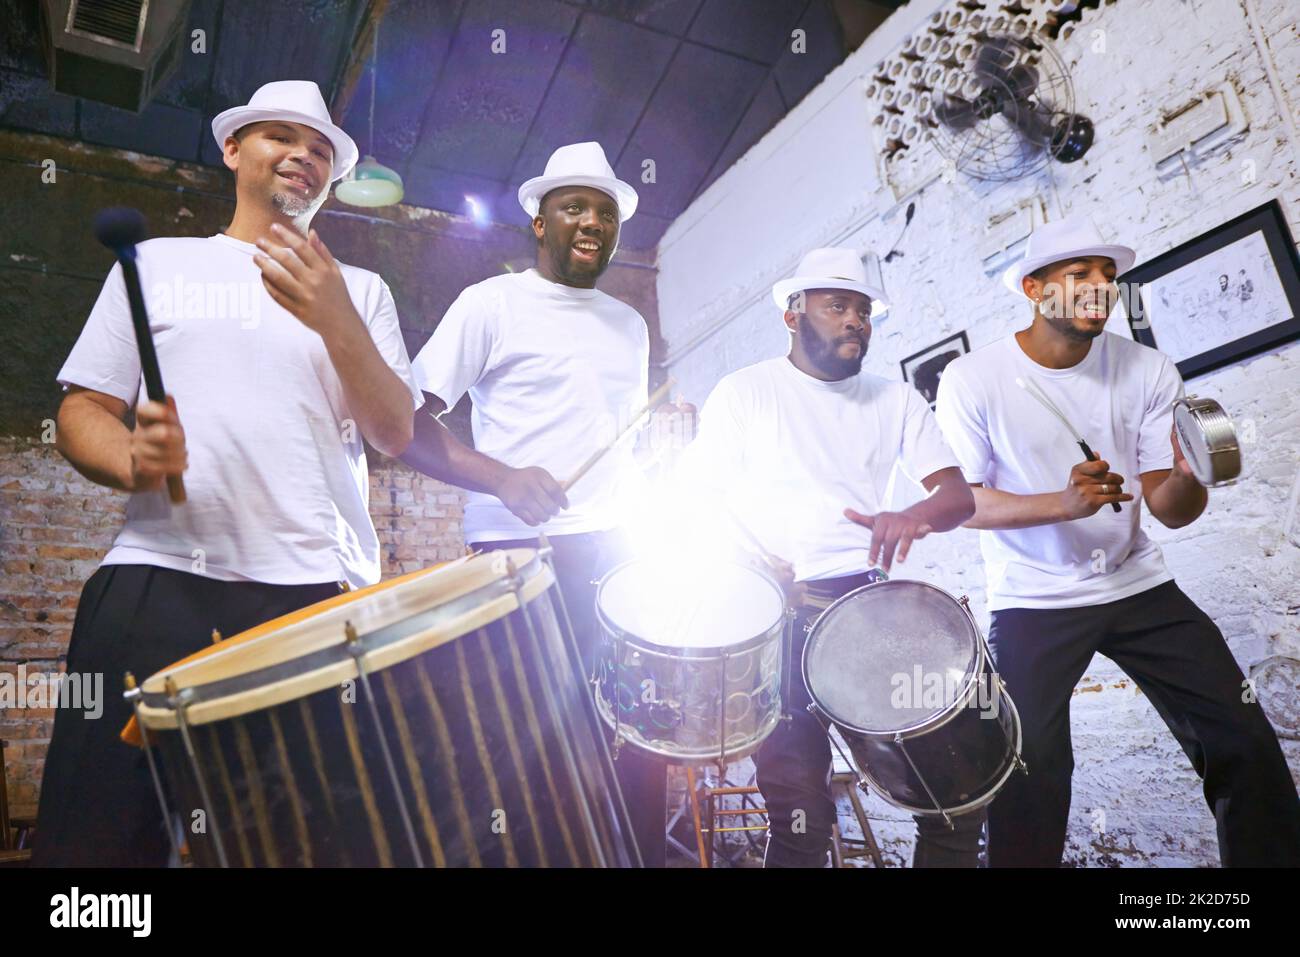 Theyve got the beat that you need. Shot of an ethnic group performing indoors. Stock Photo